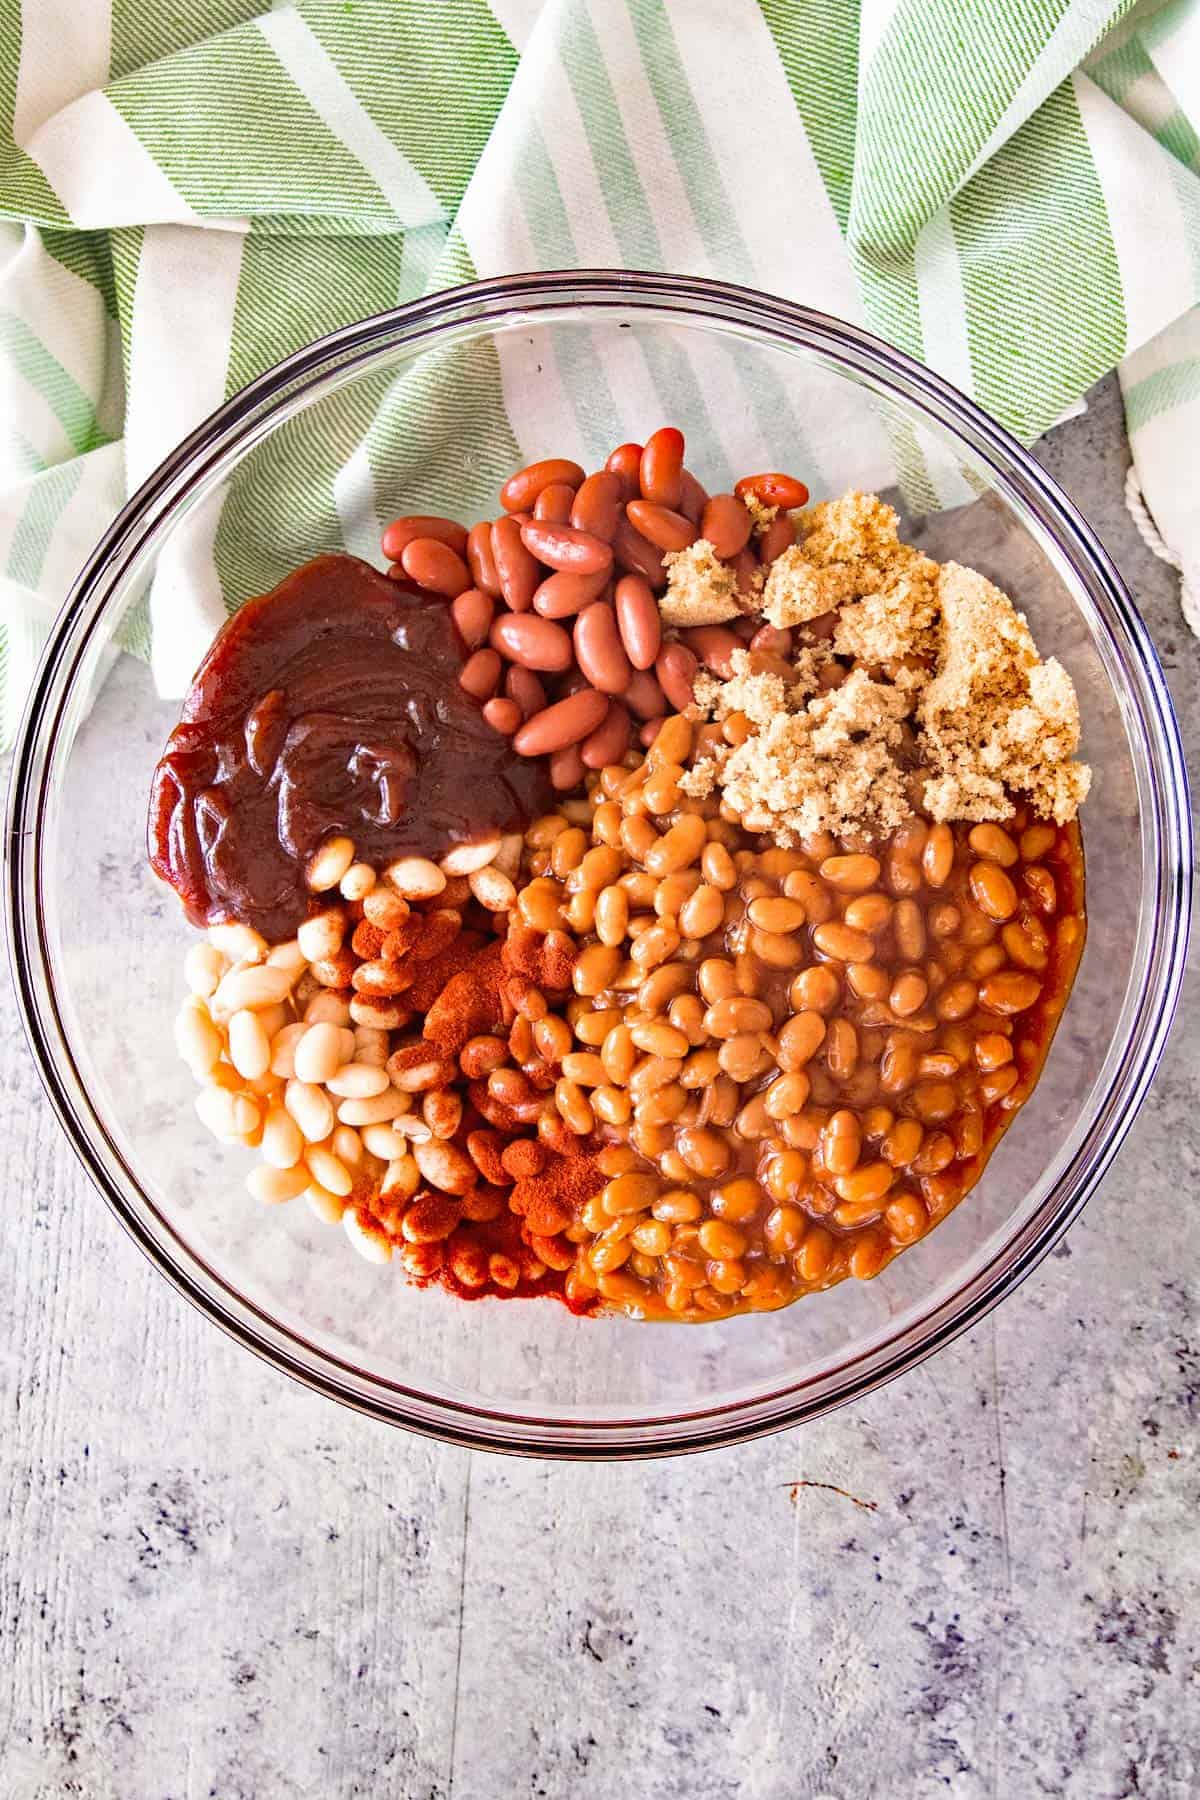 BBQ Baked Beans Ingredients